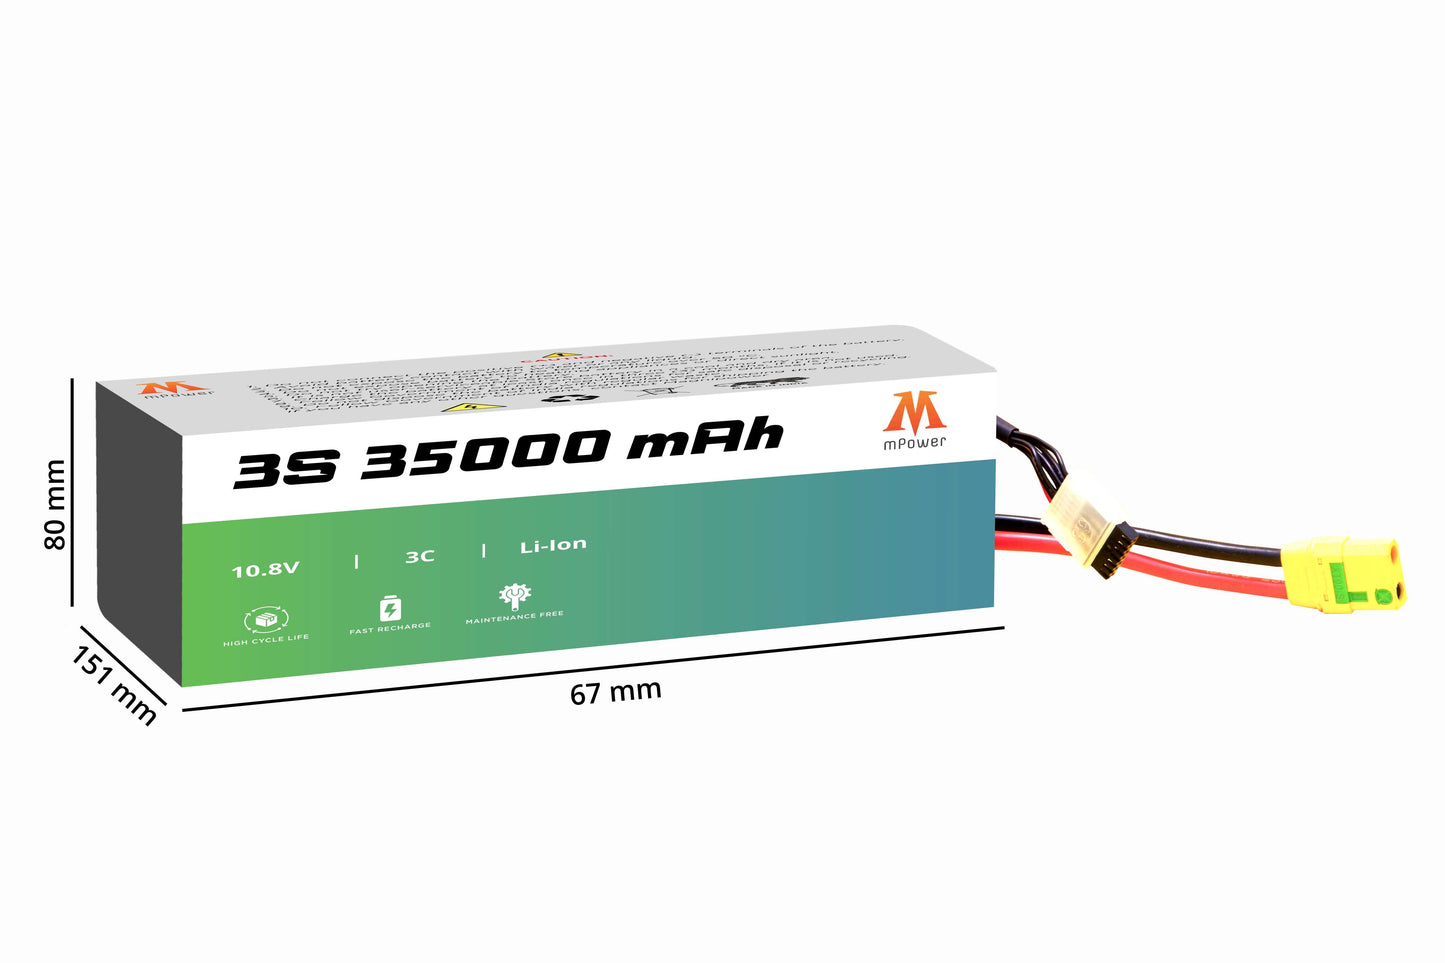 mPower 3S 35000mAh Lithium-Ion Battery for Survey Drones